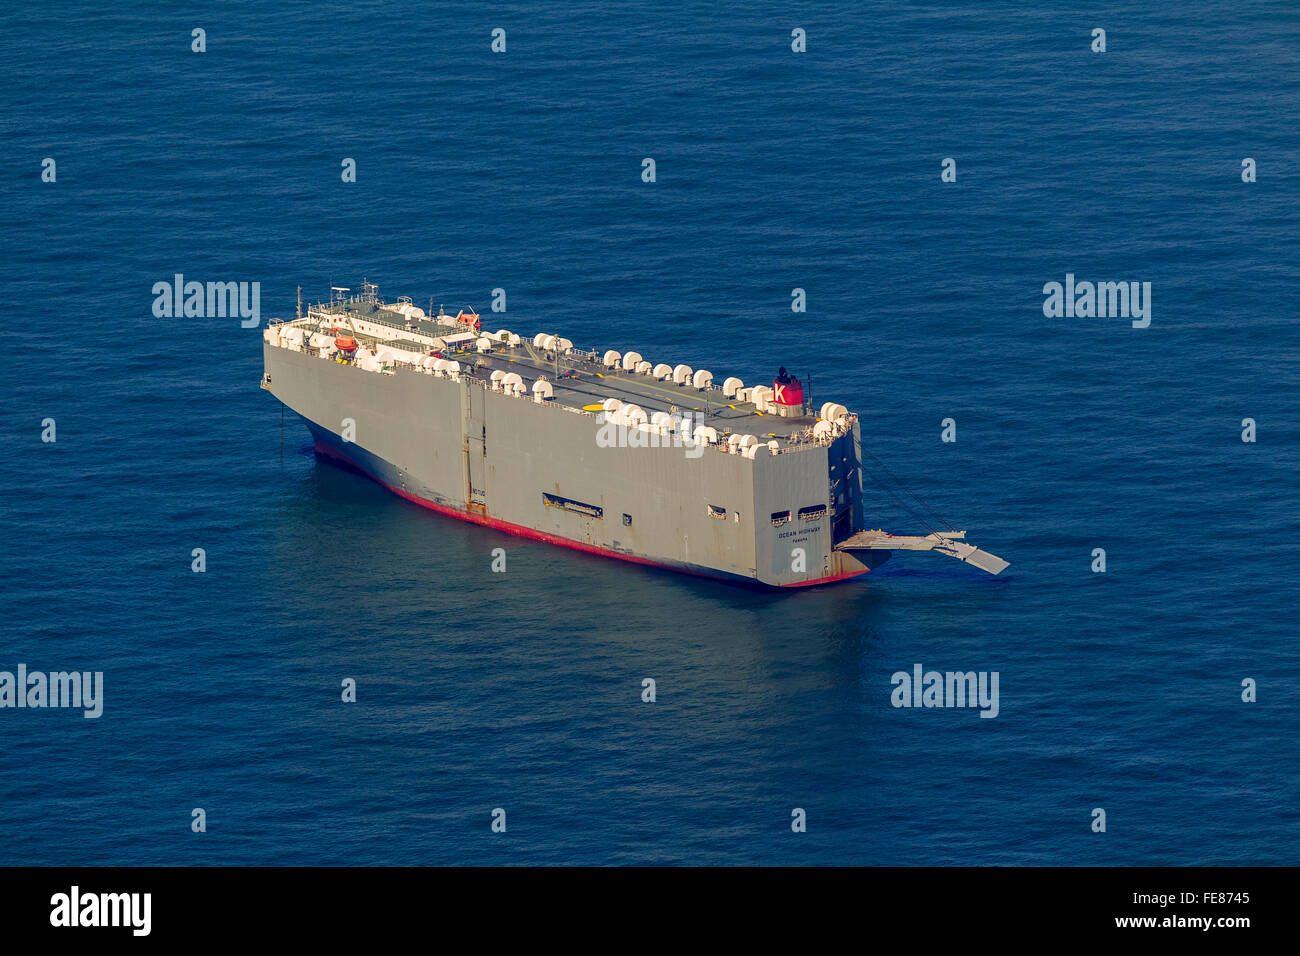 Aerial view, Cargo Ship, anchor Direction auto transporter Ocean Highway Panama, aerial view, cargo ships before Spiekeroog Stock Photo